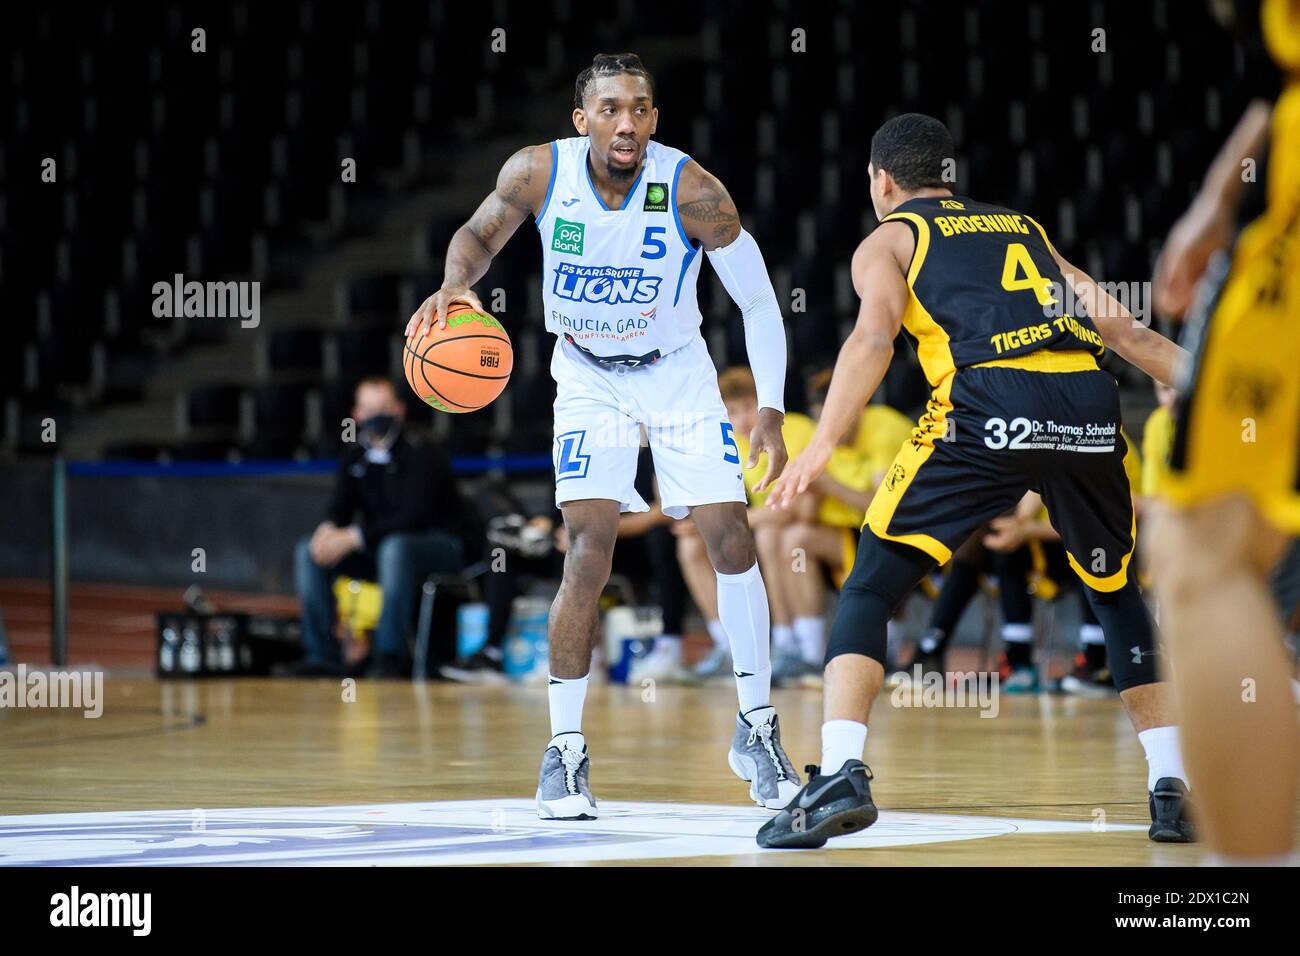 Karlsruhe, Germania. 23 dicembre 2020. Gregory Clay Foster (Lions) in duelli con Mirjan Aime Kabuya Broening (Tuebingen). GES/Basketball/Proa: PSK Lions - Tigers Tuebingen, 23.12.2020 - | Use Worldwide Credit: dpa/Alamy Live News Foto Stock